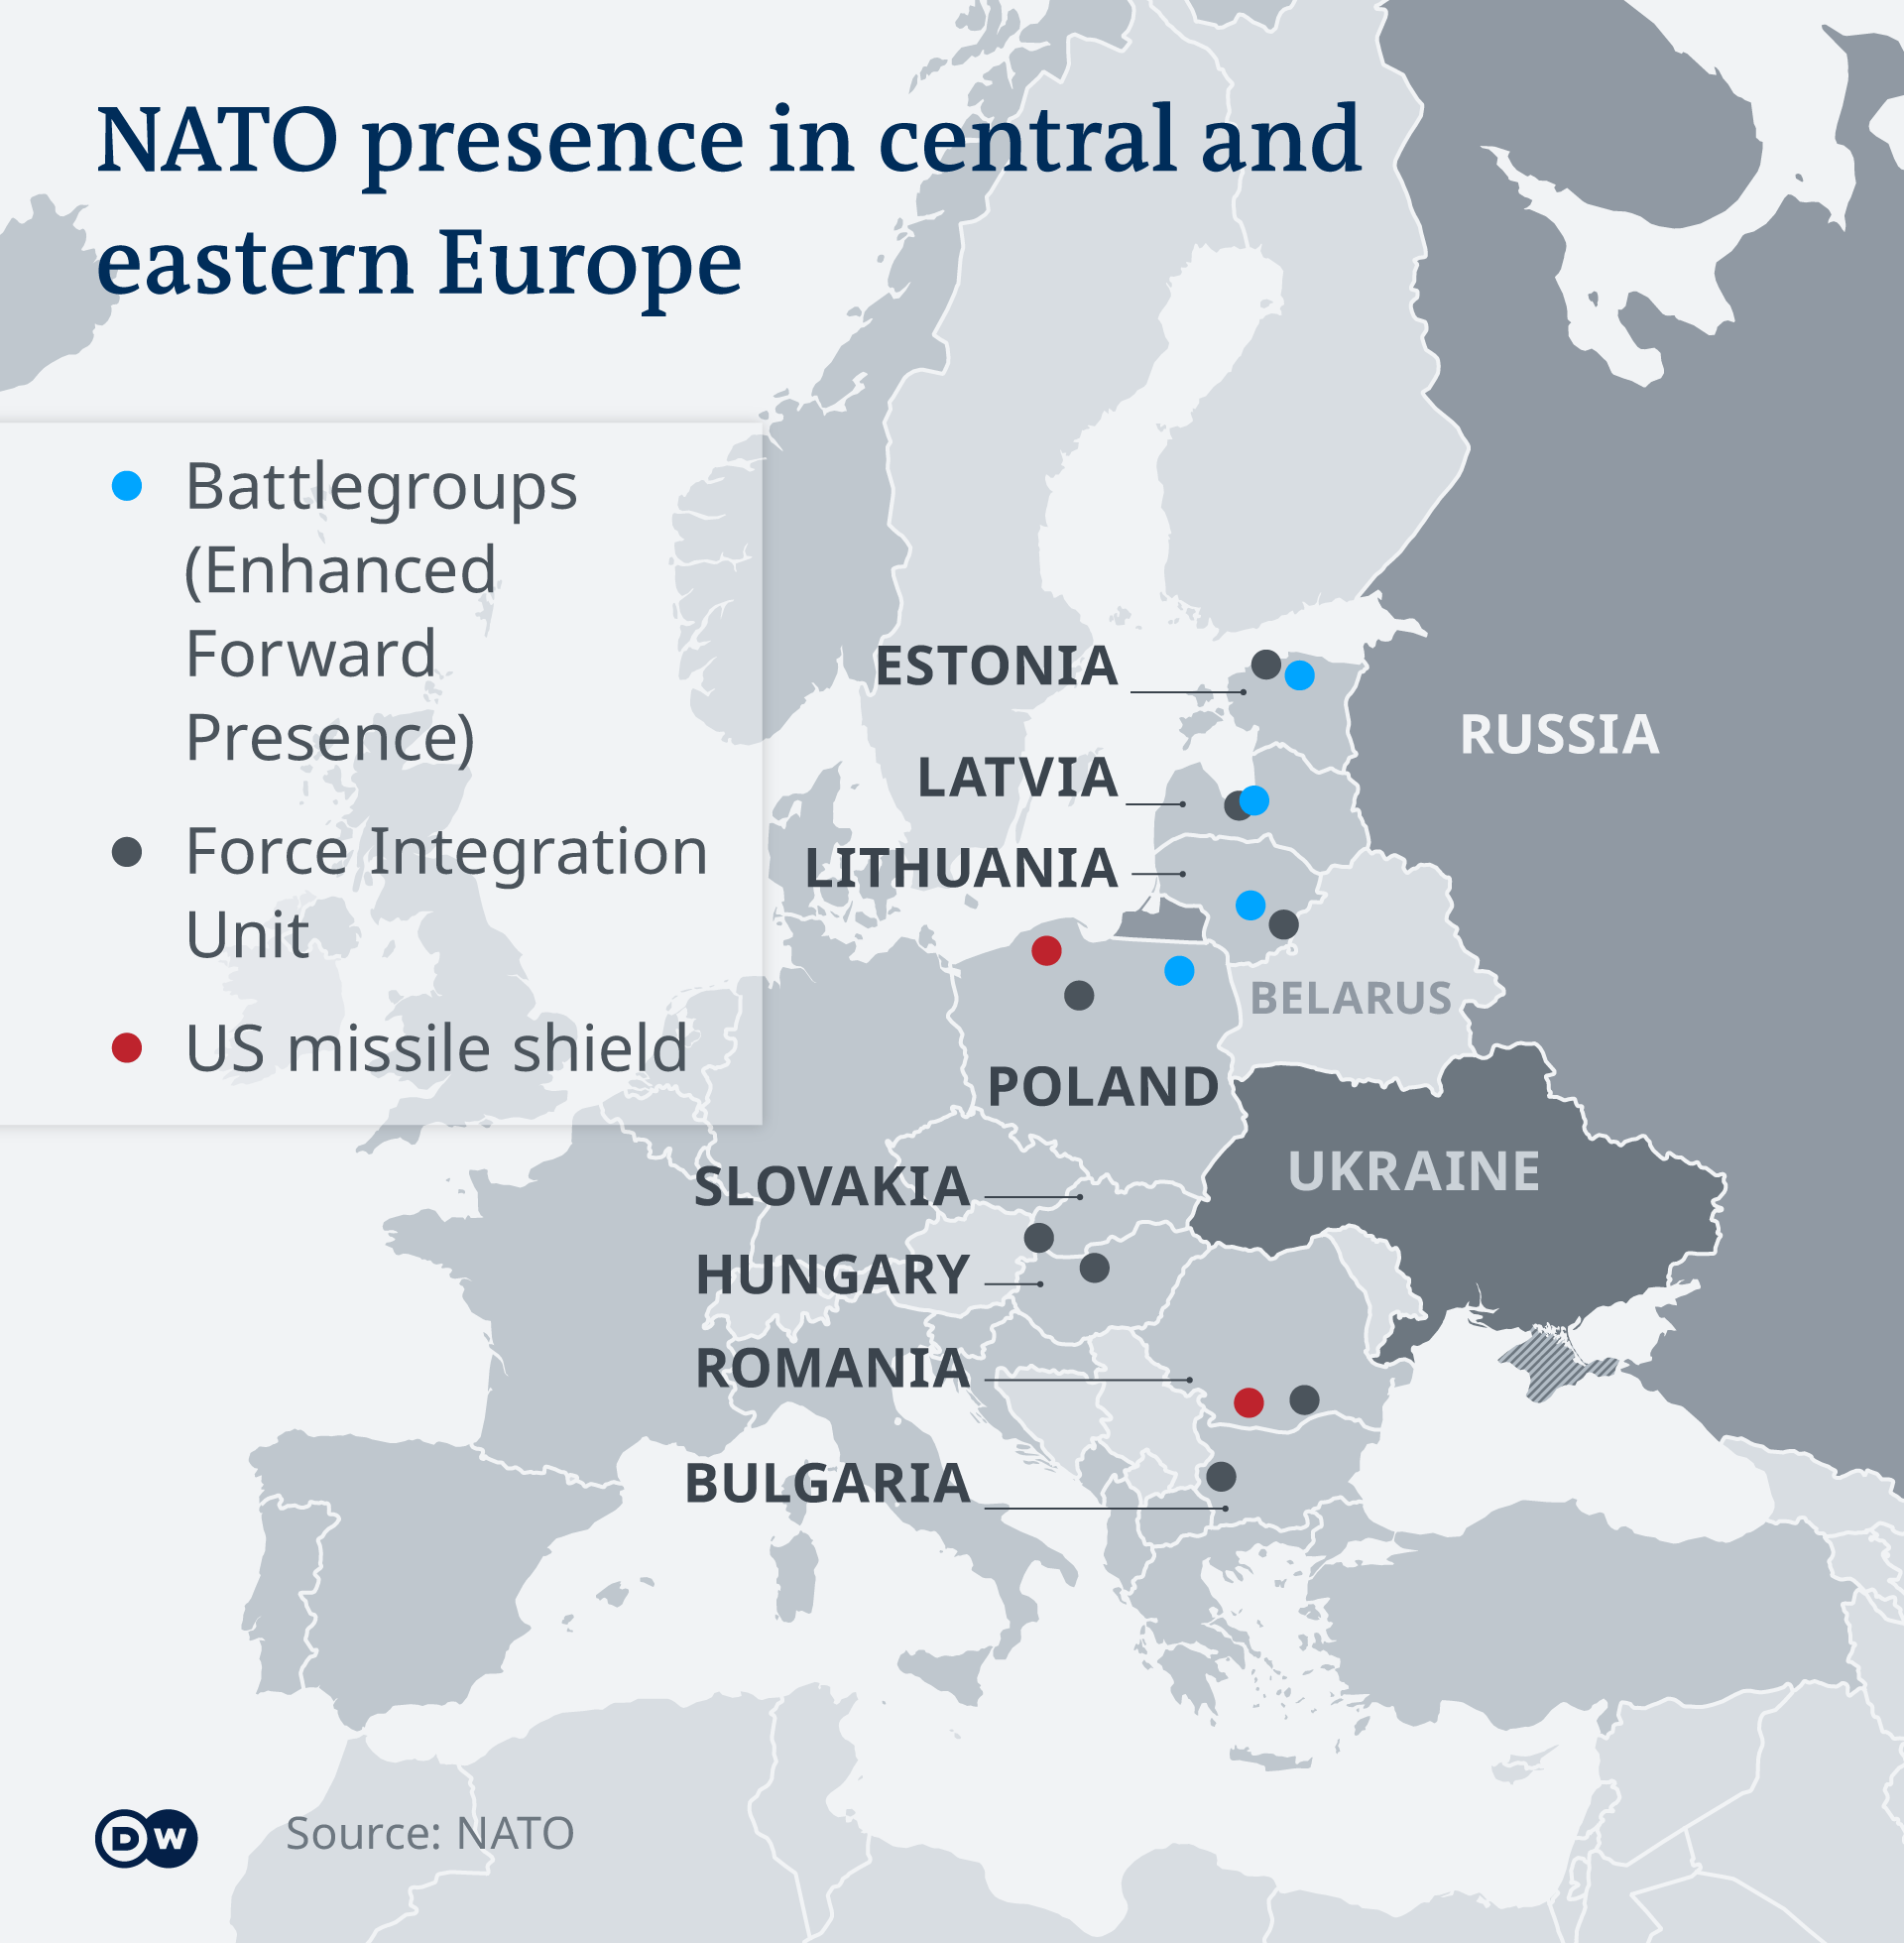 Map indicating NATO presence in eastern Europe